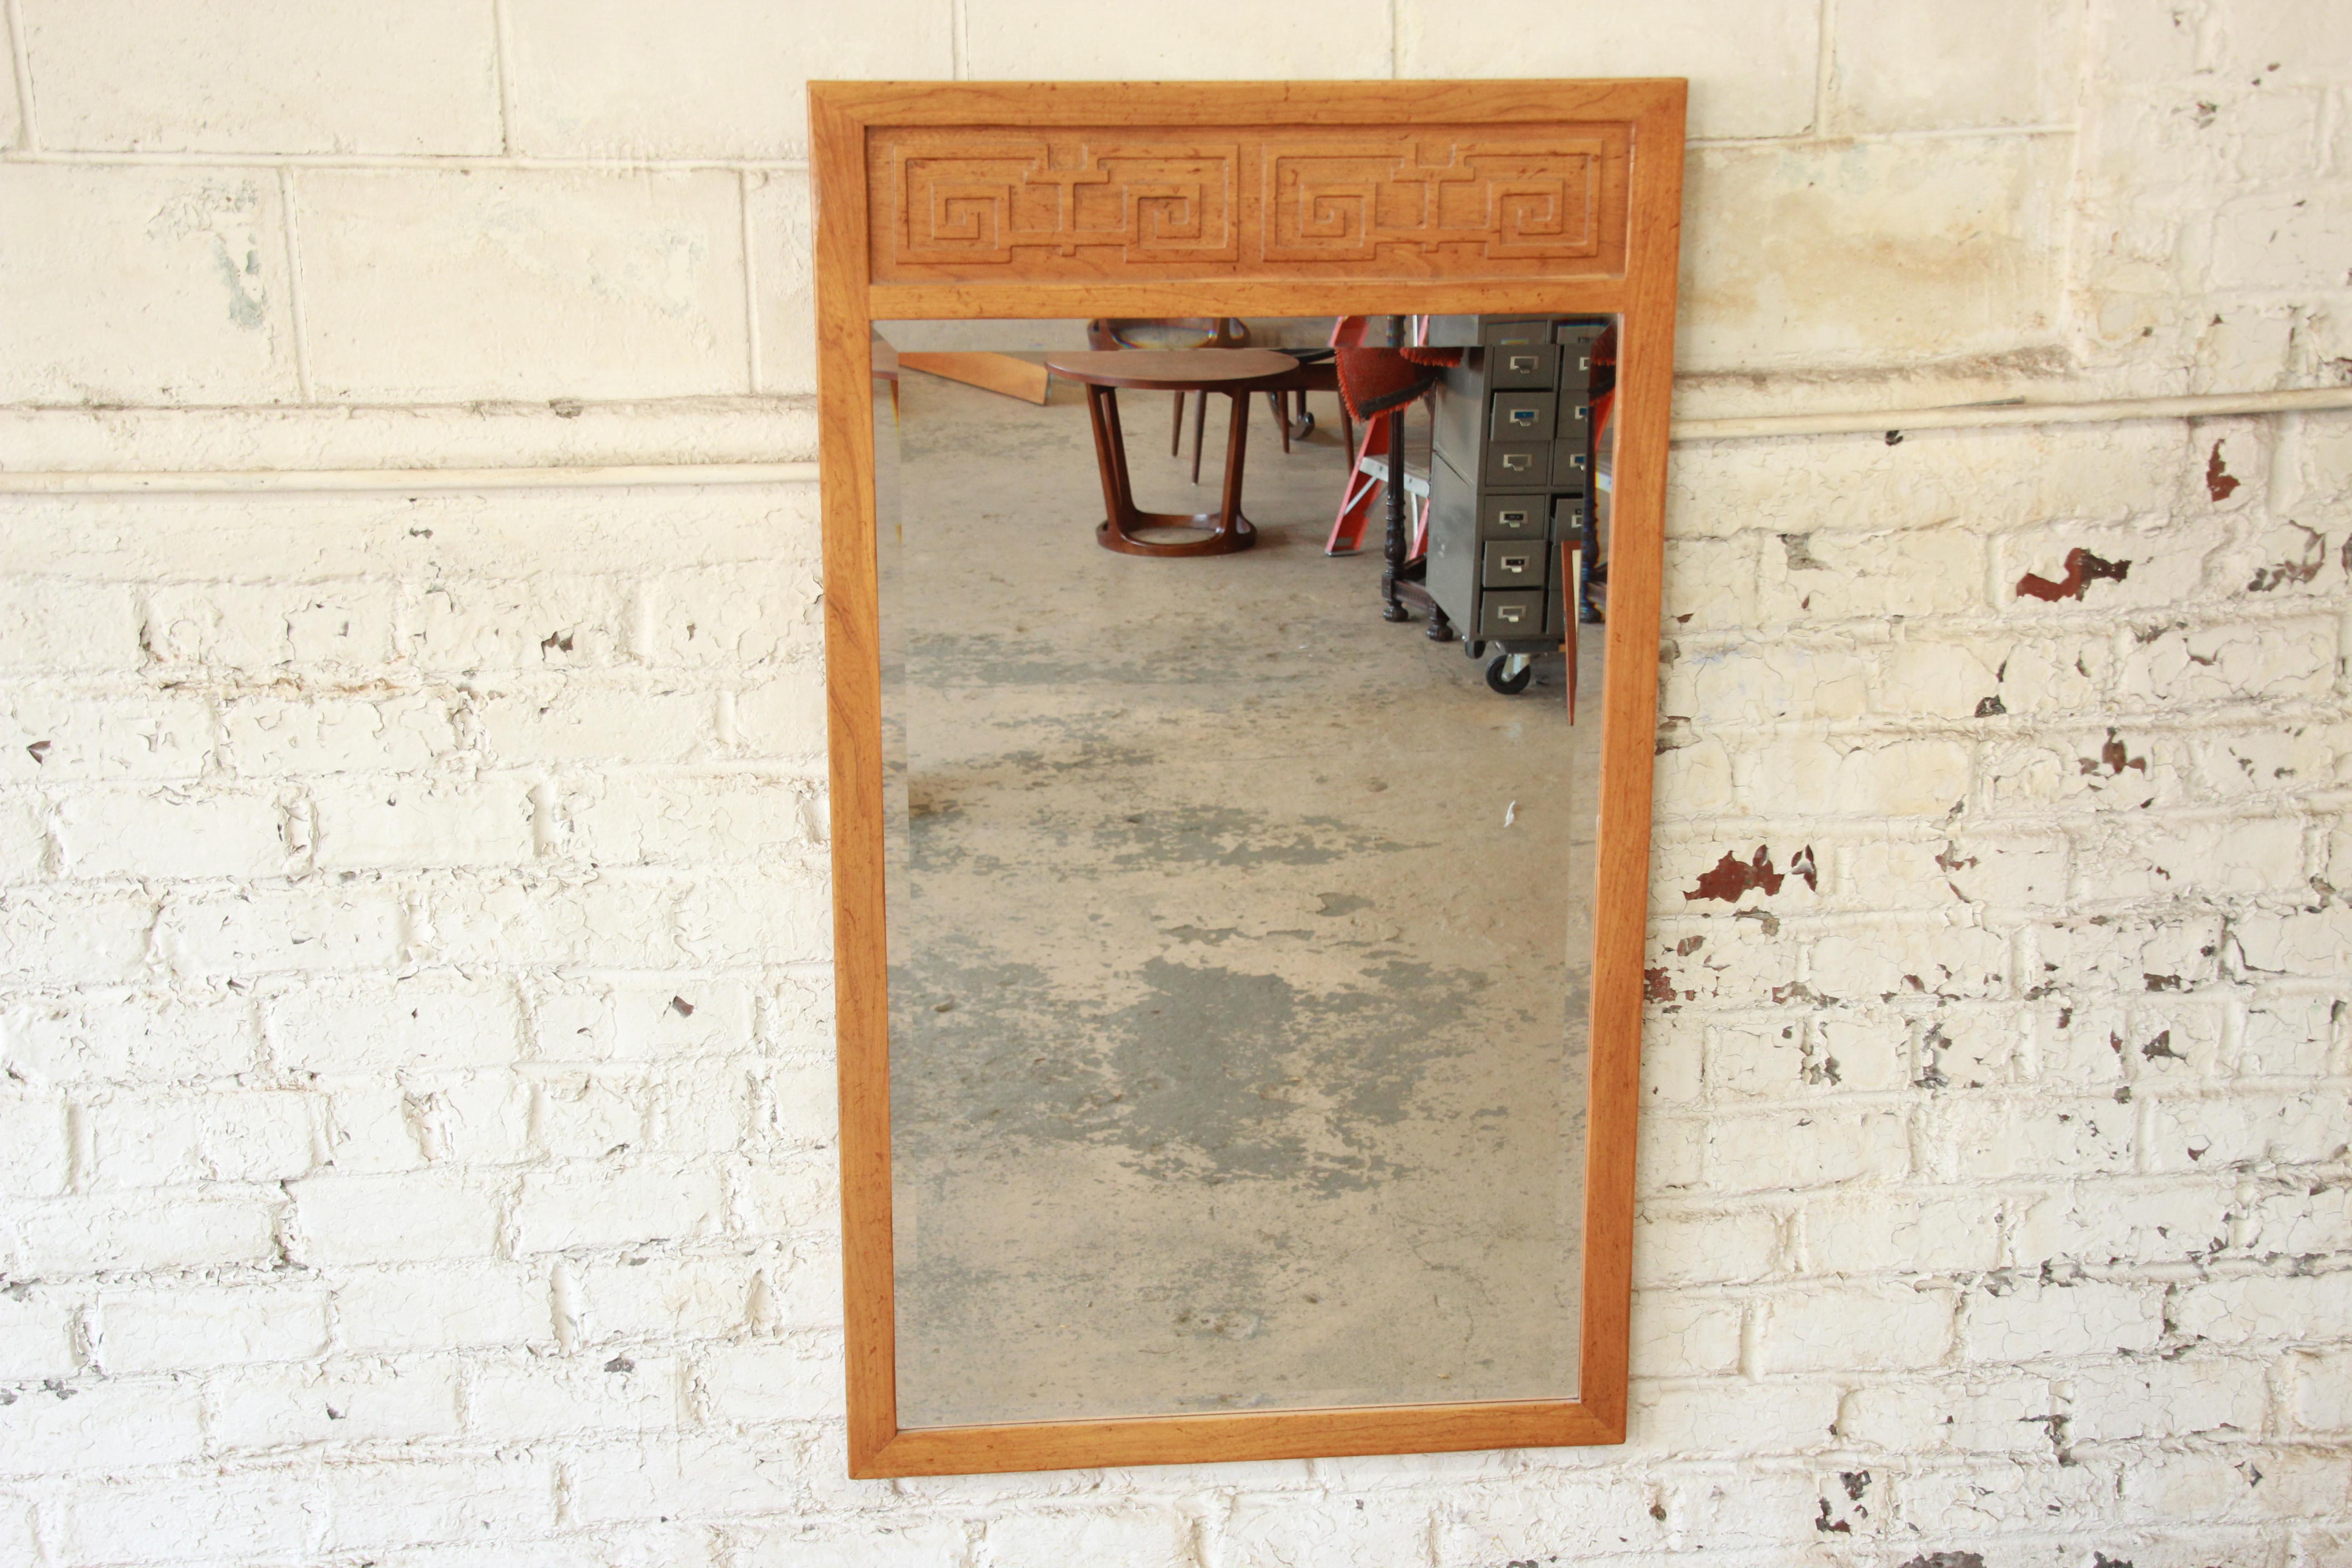 A stunning Hollywood Regency chinoiserie beveled wall mirror from the Far East collection by Michael Taylor for Baker Furniture. The mirror features a gorgeous solid elm wood frame with carved Asian details. The original Baker label is present on